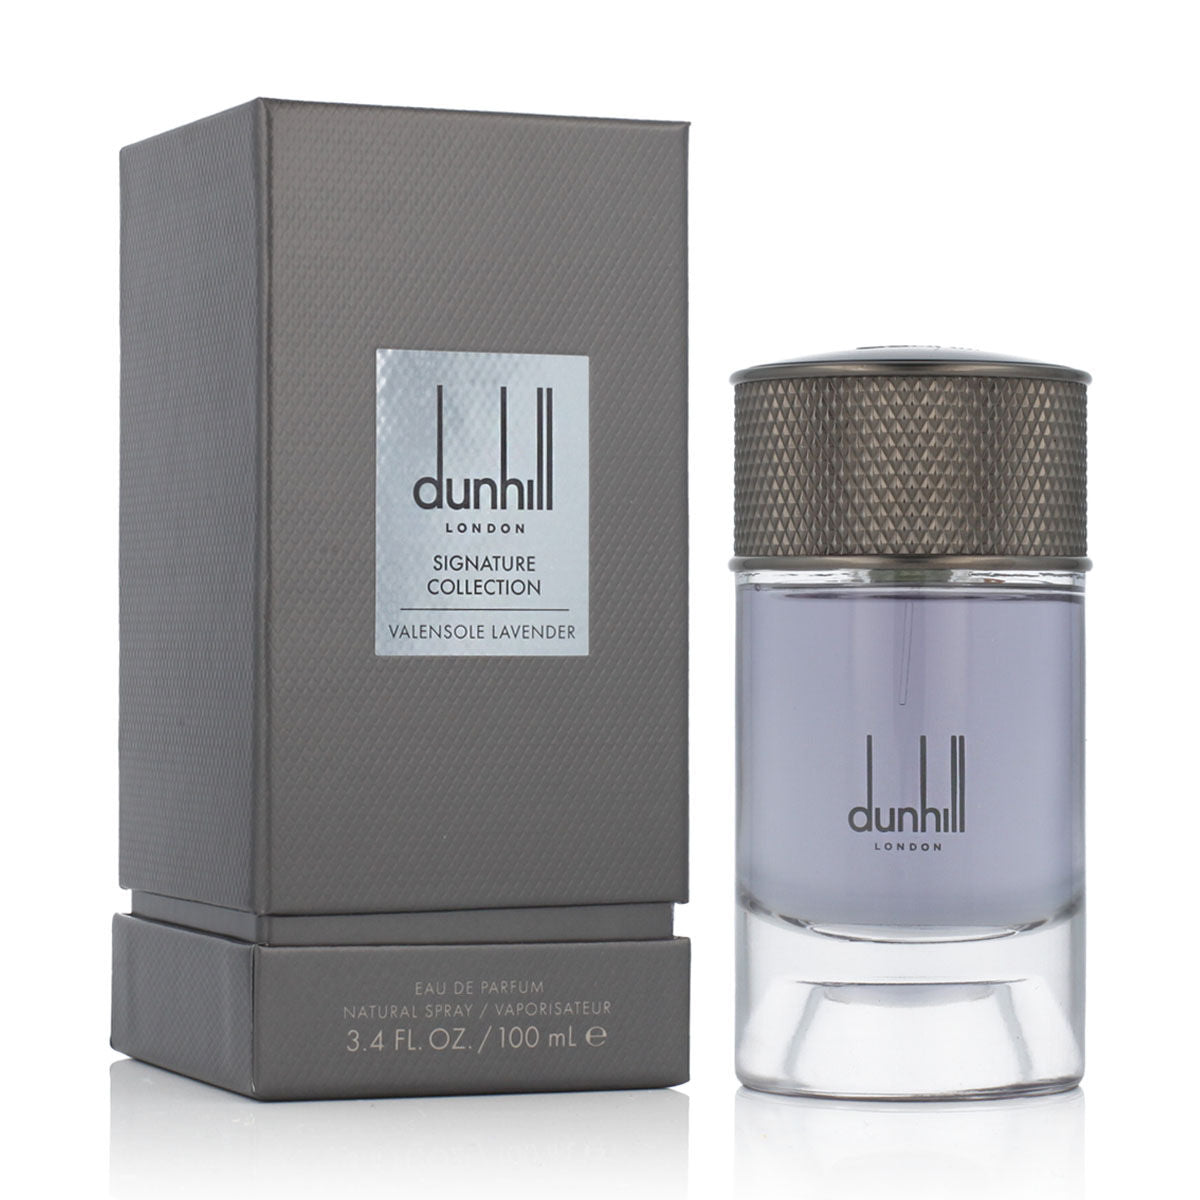 Herrparfym Dunhill EDP Signature Collection Valensole Lavender 100 ml